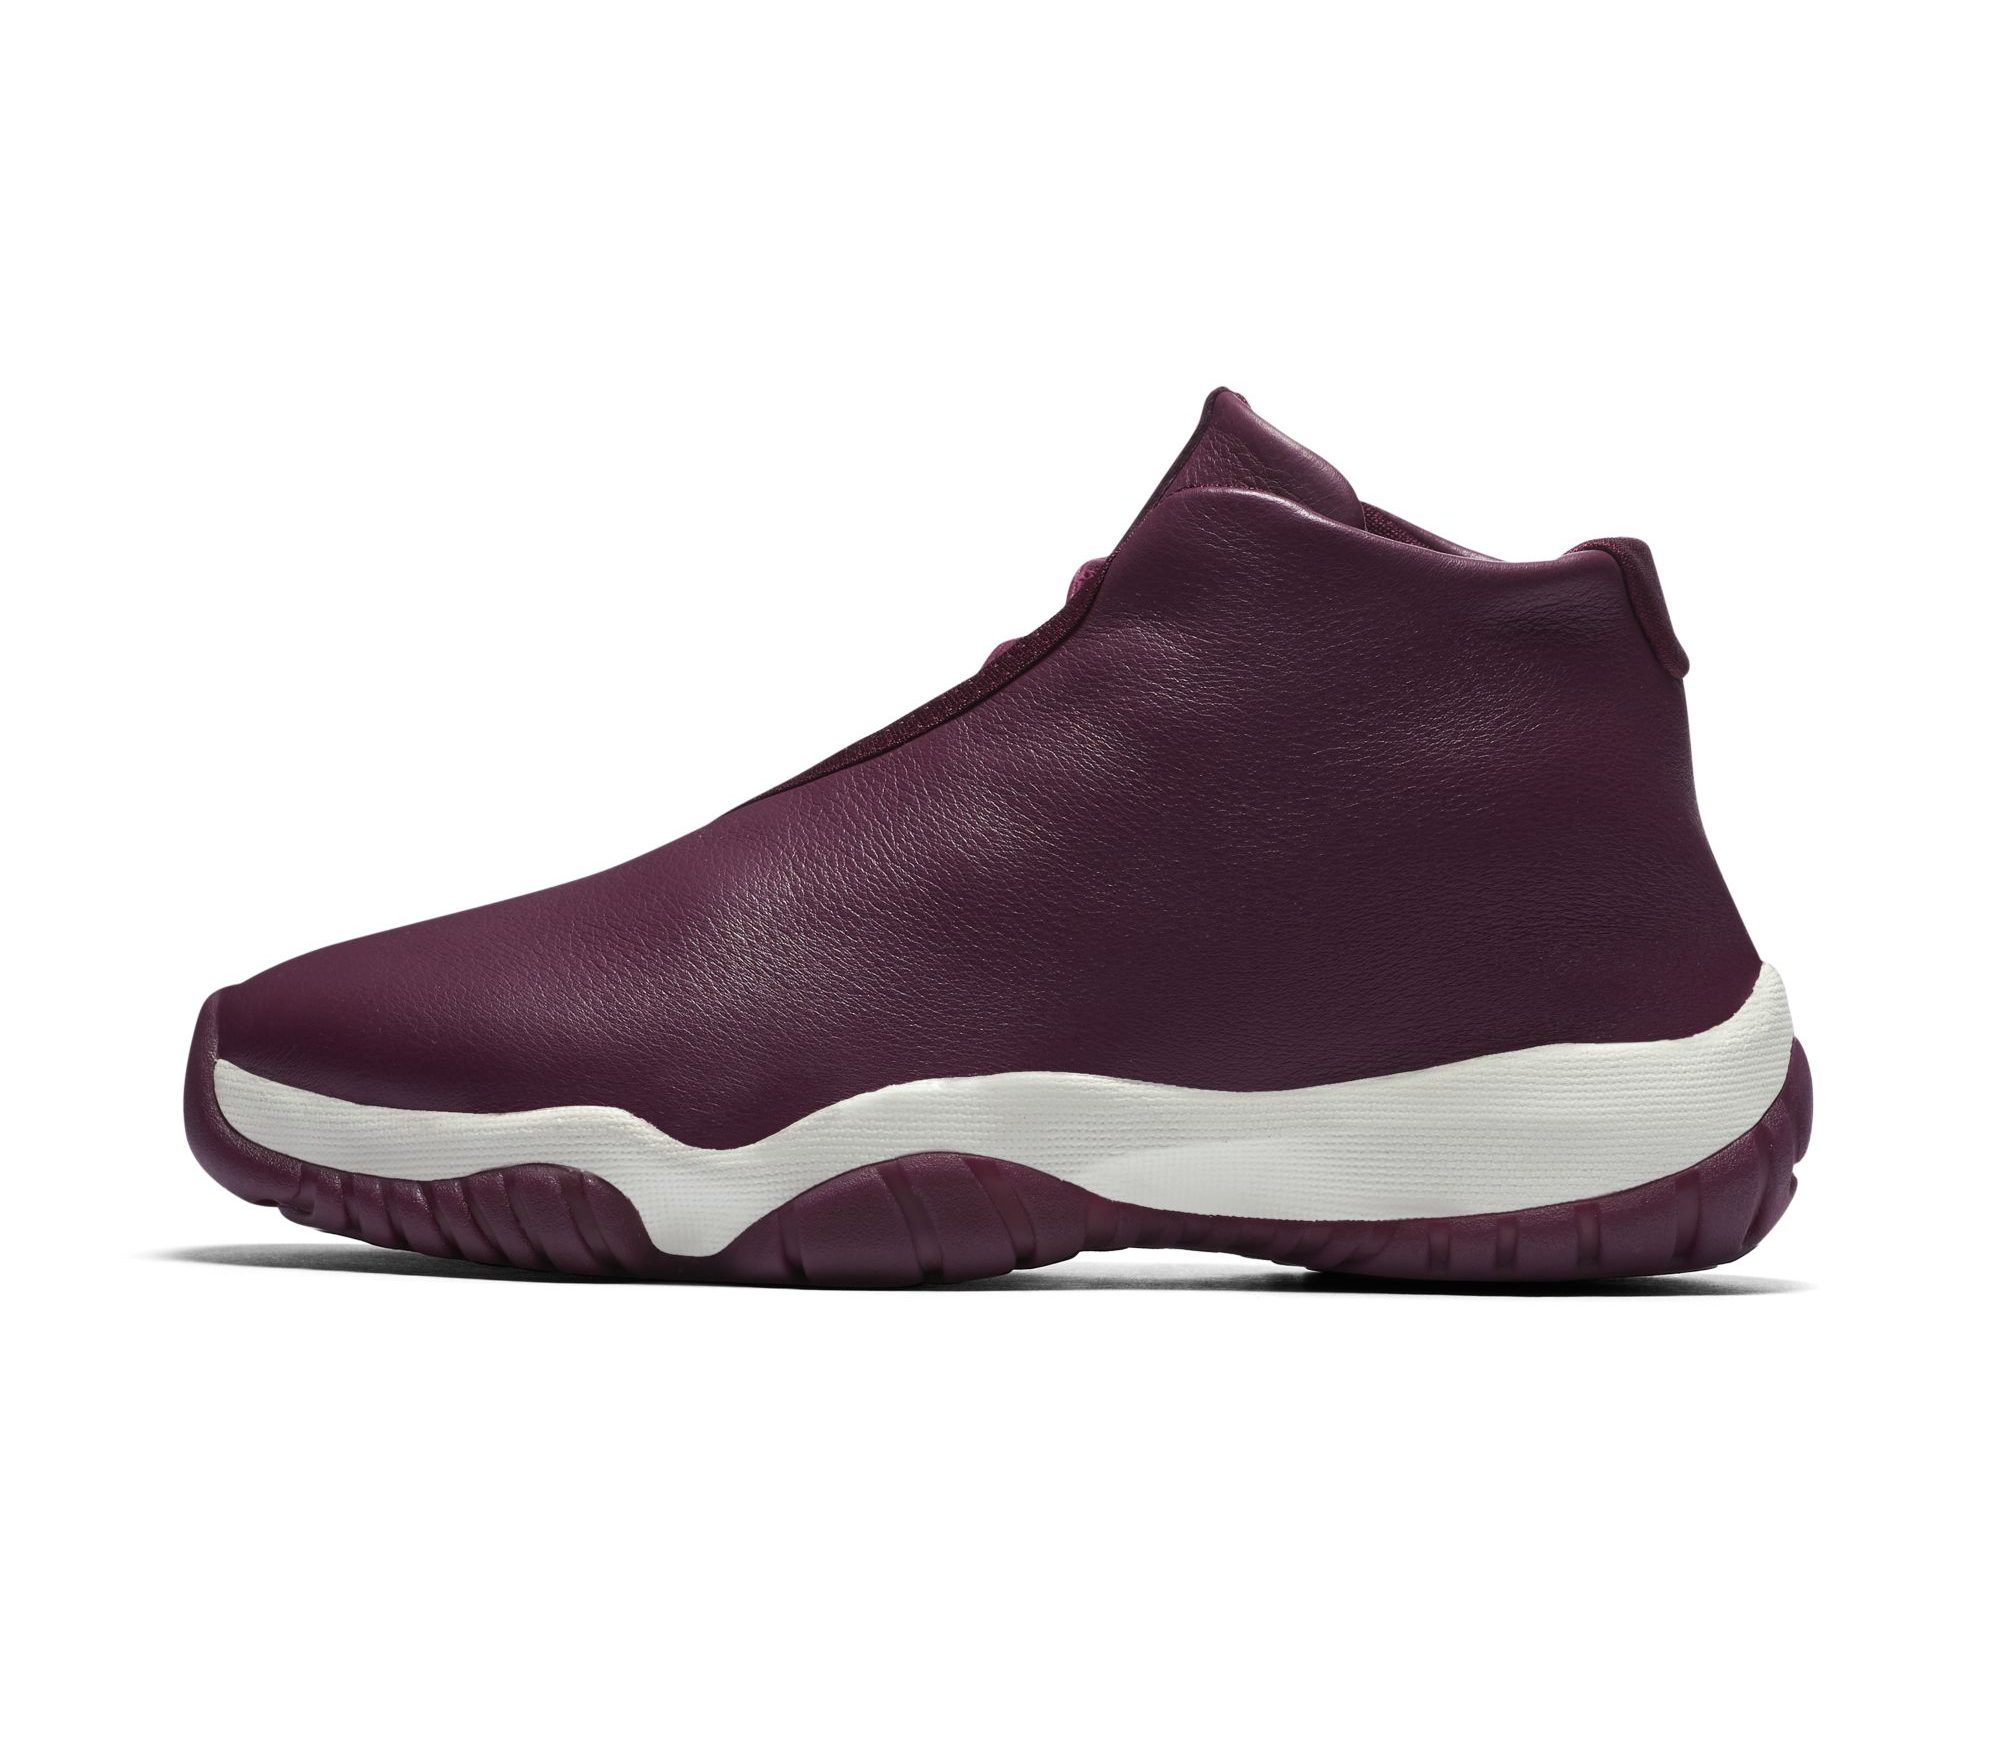 Expect the Air Jordan Future to Arrive 